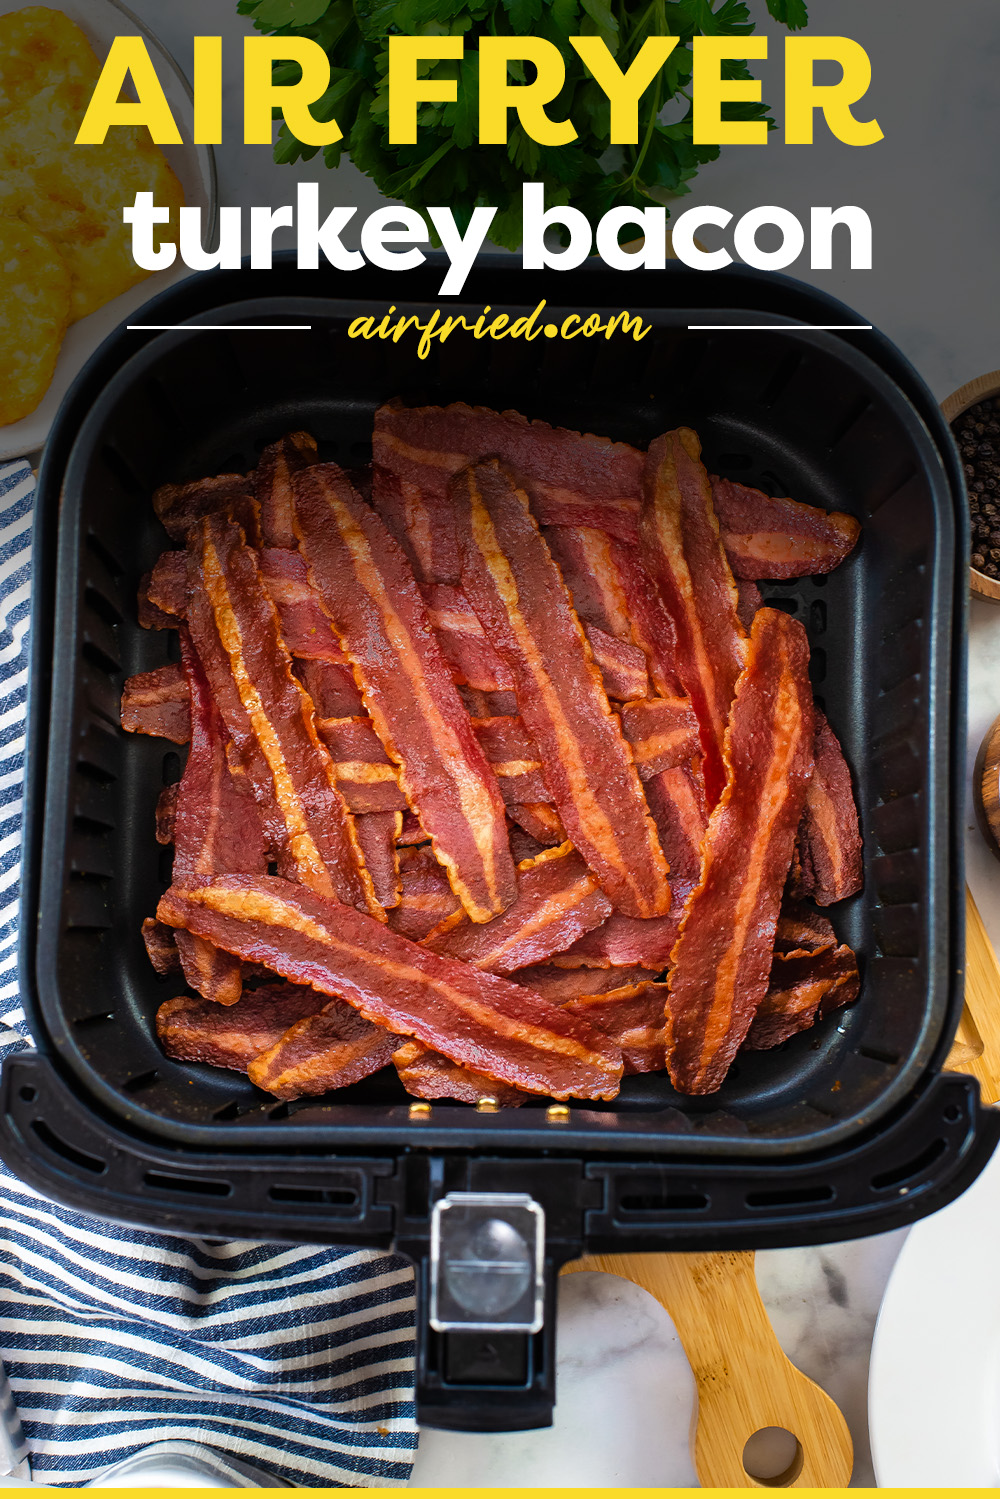 Turkey bacon in an air fryer is easy to make and easy to clean up!